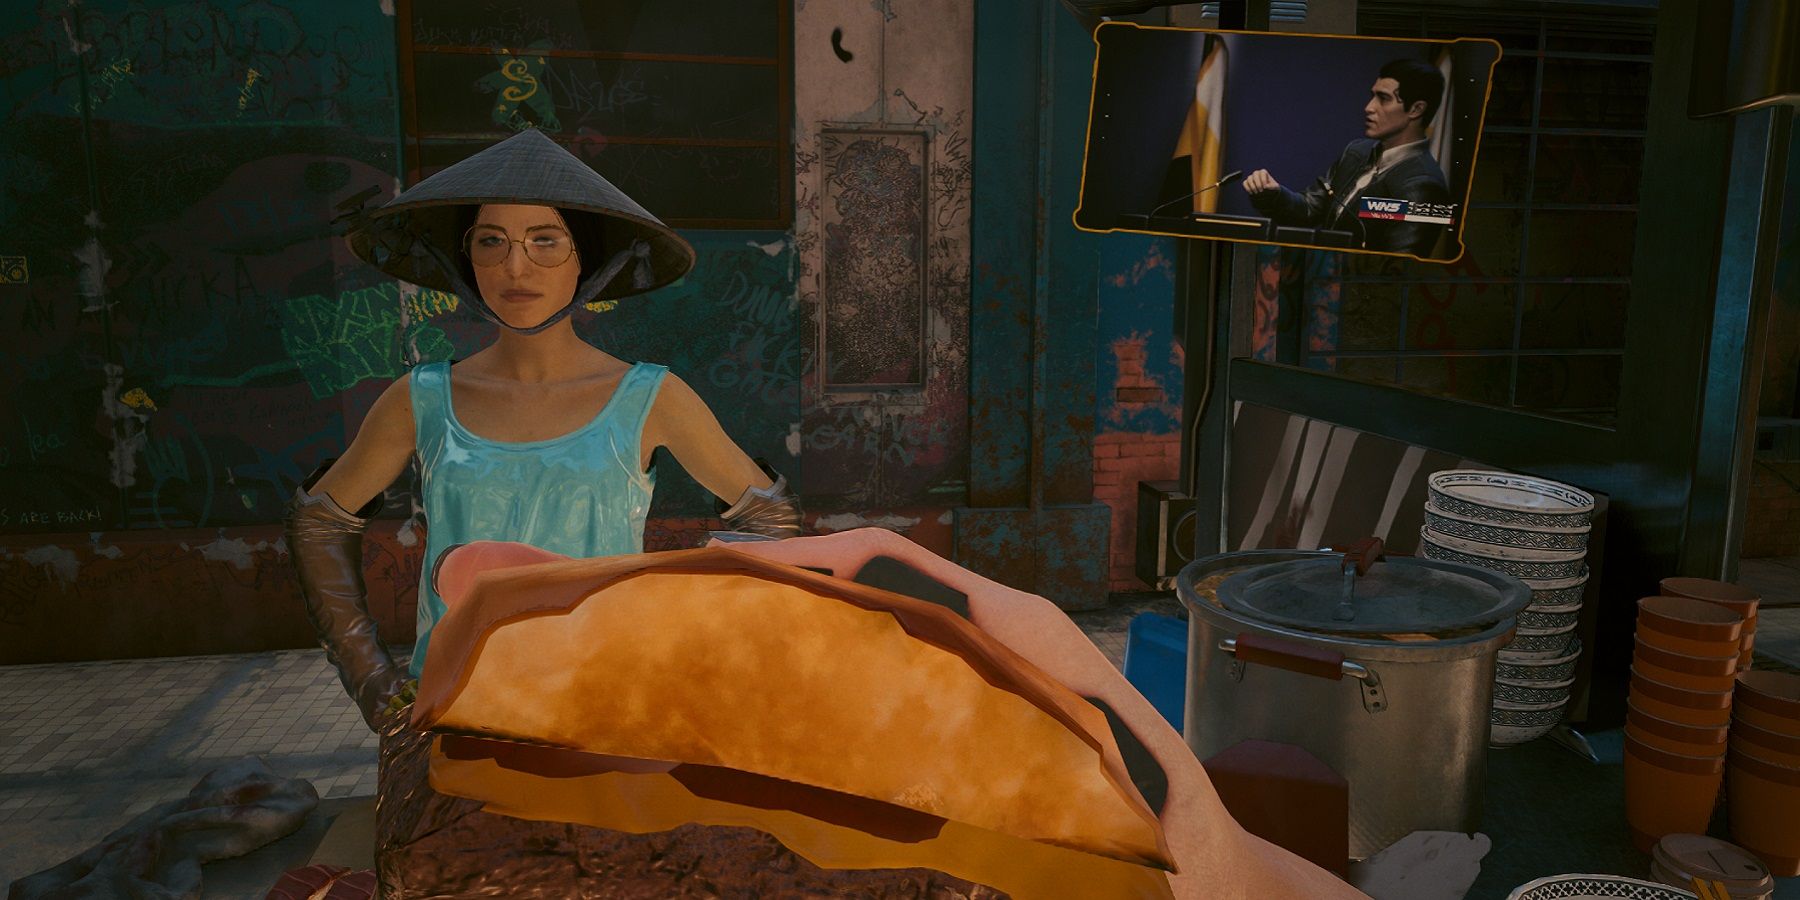 Image from Cyberpunk 2077 showing V about to devour a sandwich as a vendor looks on.